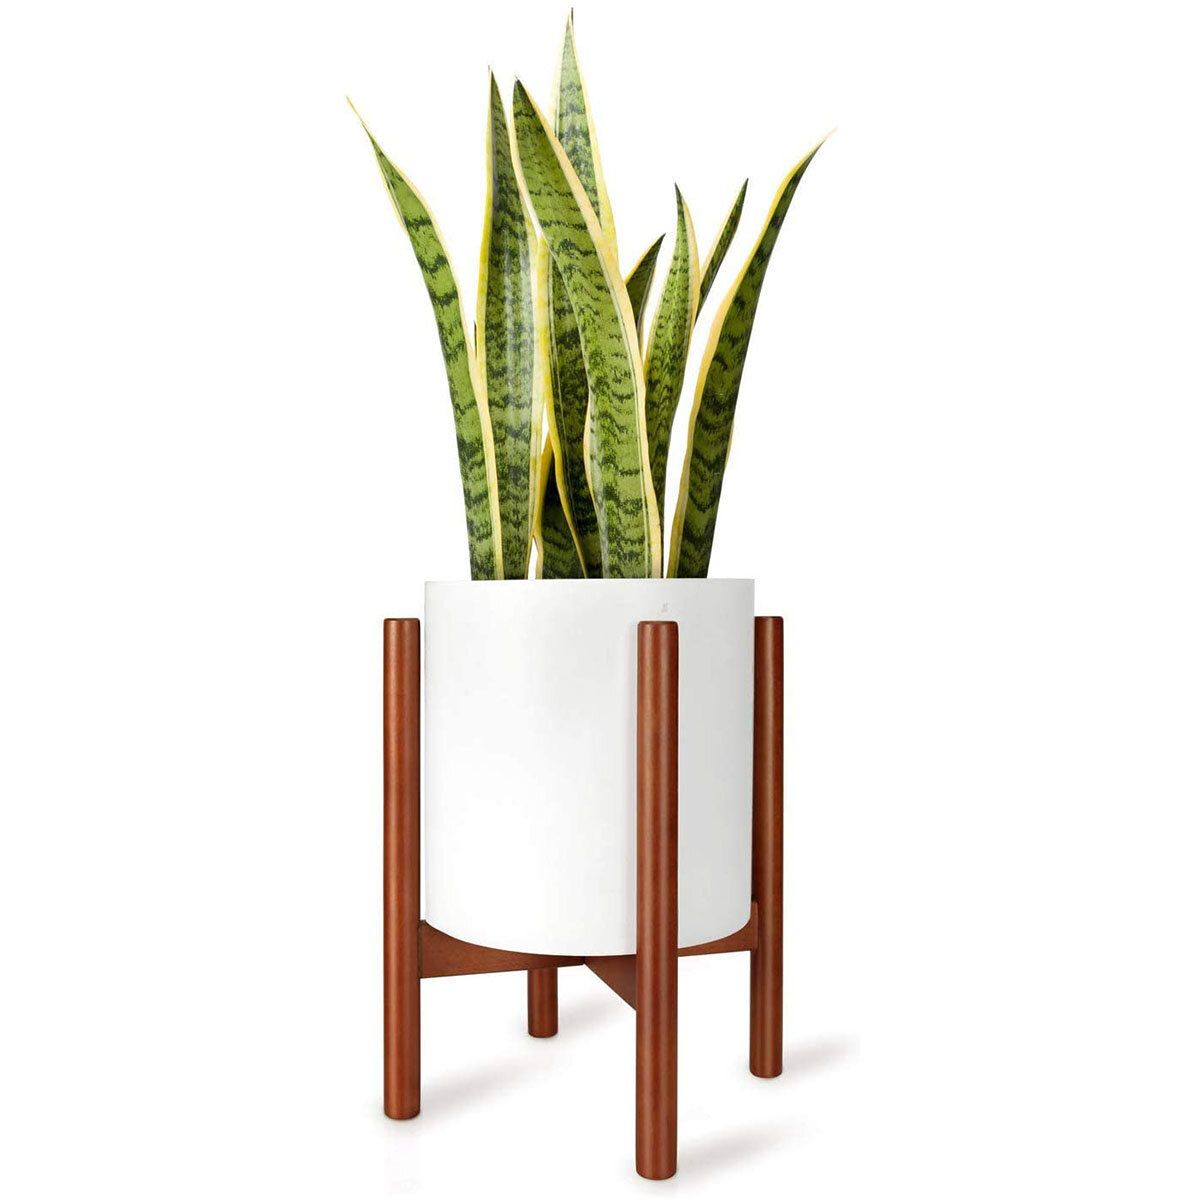 Corrigan Studio® Dhalchand Plant Stand Mid Century Wood Flower Pot Holder ( Plant Pot Not Included) Modern Potted Stand Indoor Display Rack Rustic  Decor, Up To 10 Inch Planter, Brown | Wayfair Inside 10 Inch Plant Stands (View 6 of 15)